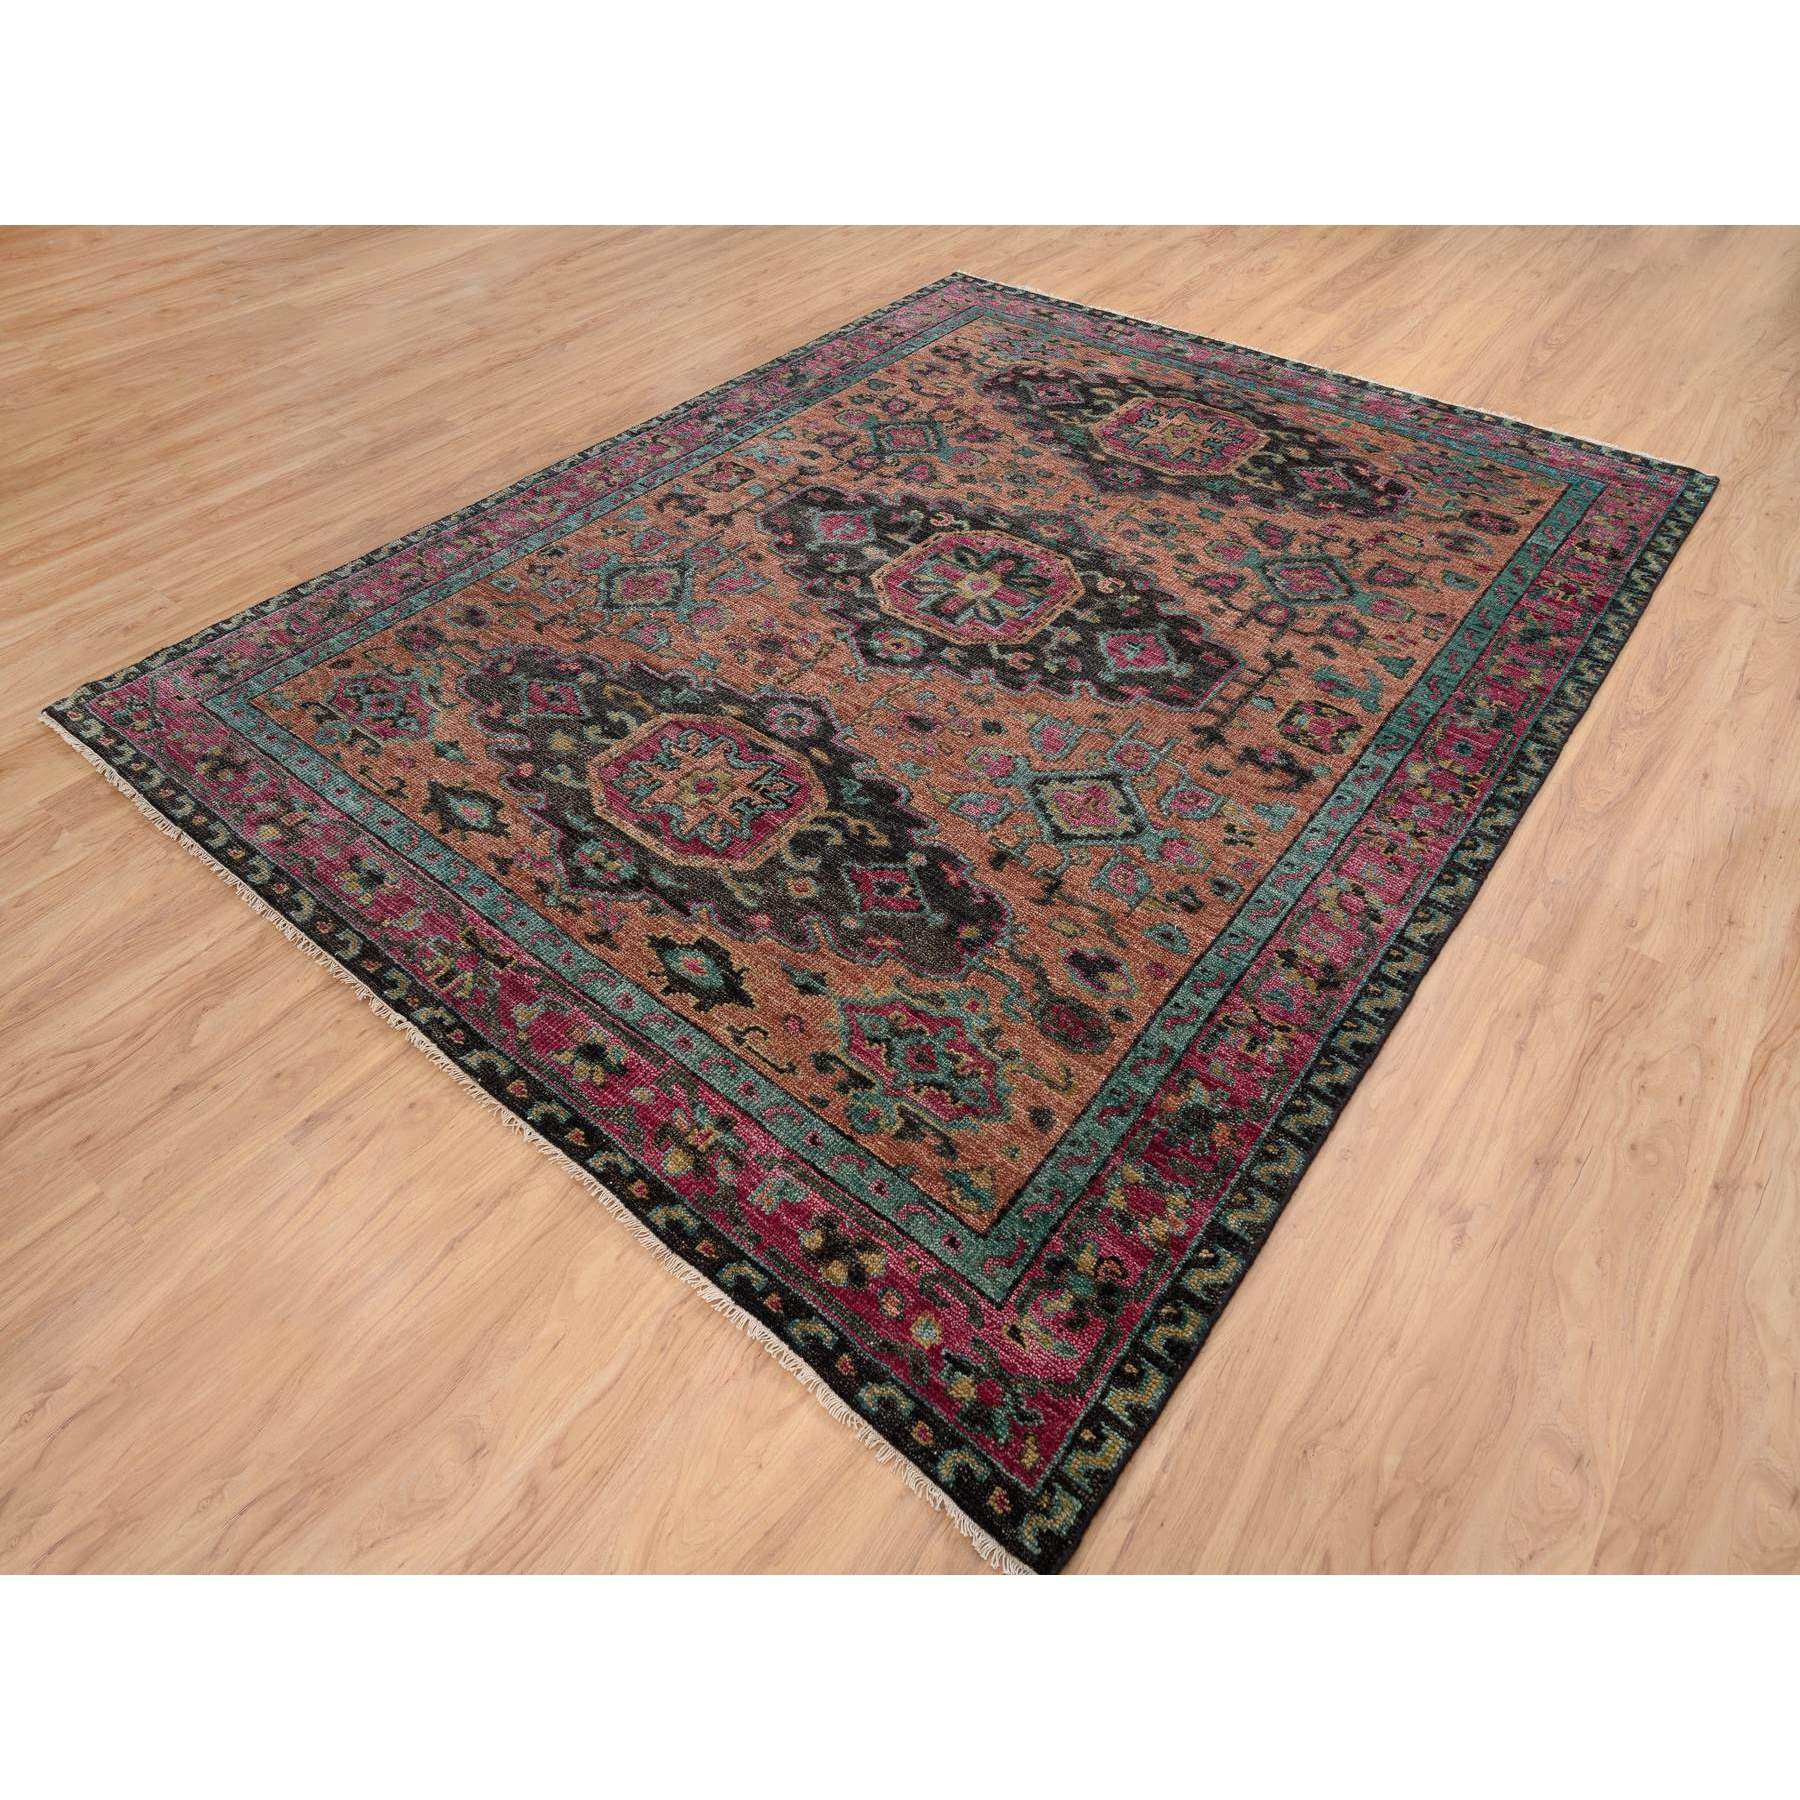 8'2"x10' Honey Brown with Purple Border, Anatolian Design Supple Collection Thick and Plush, Hand Woven Pure Wool, Oriental Rug 